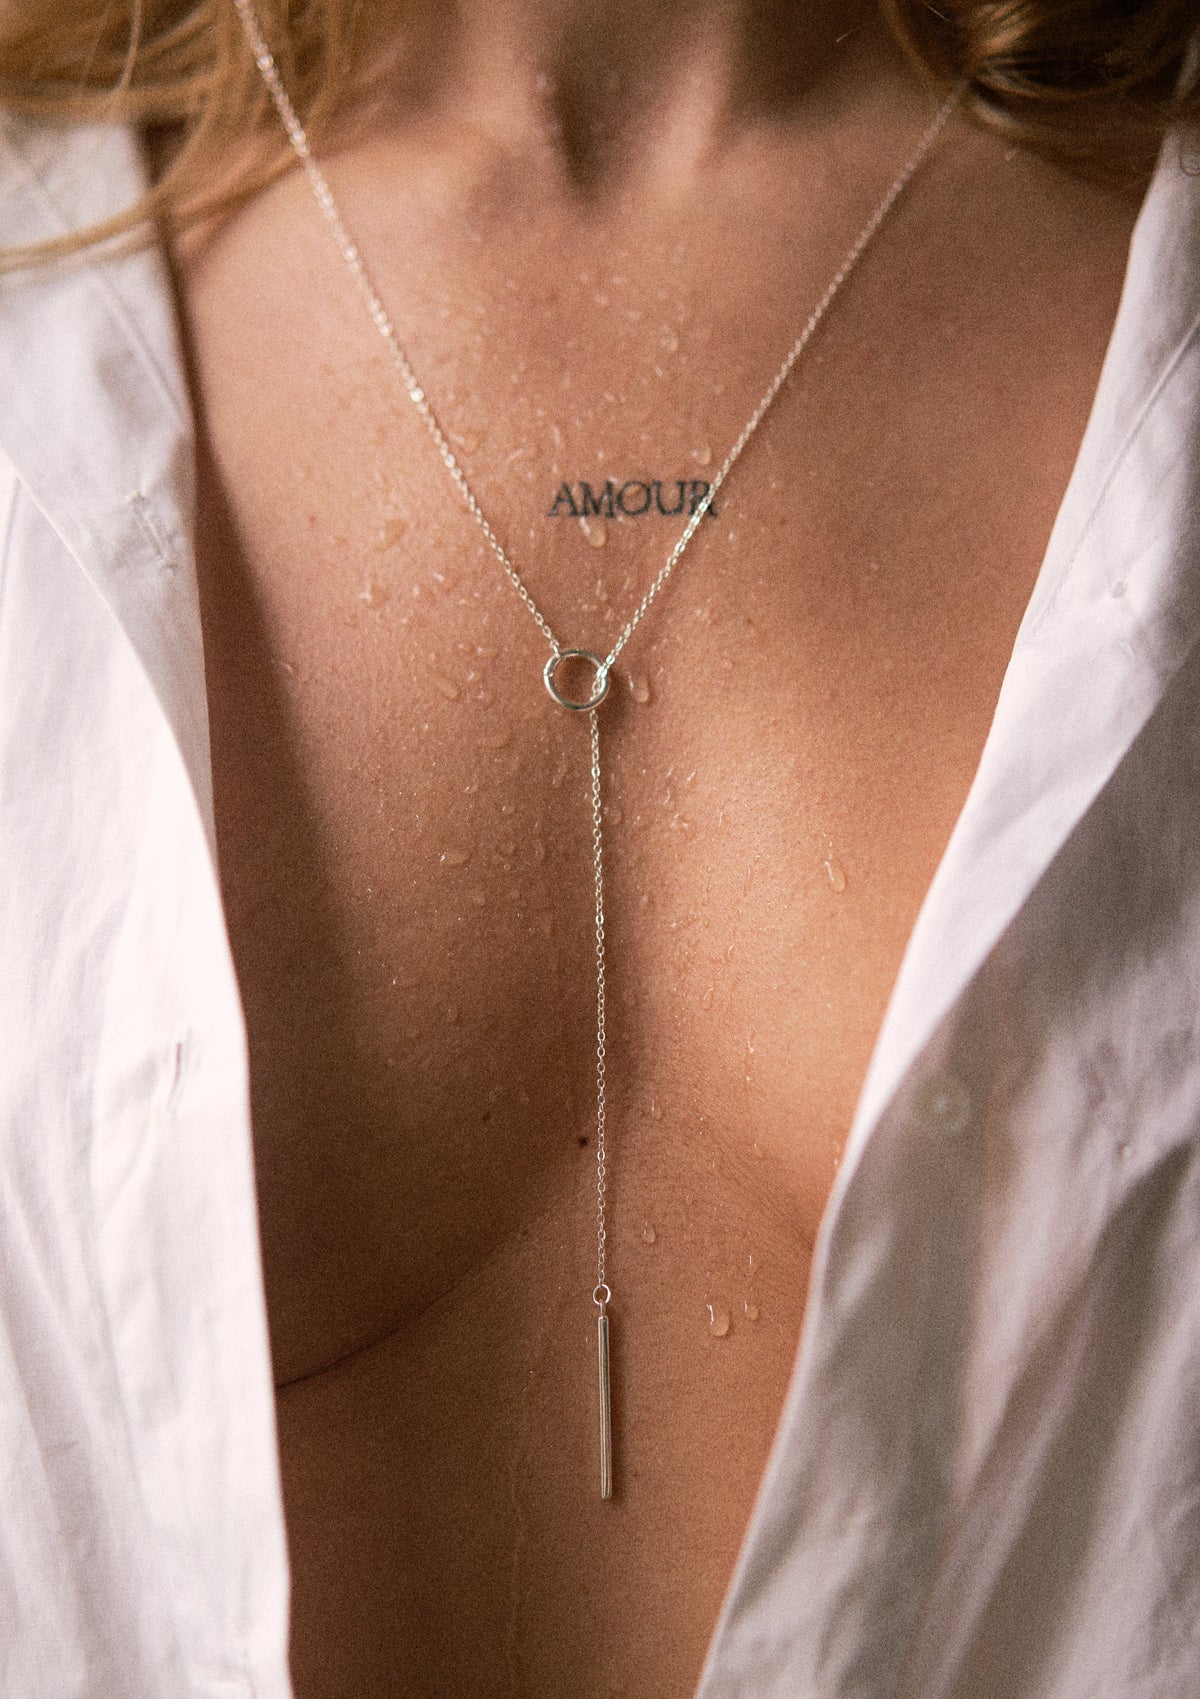 Amour silver necklace